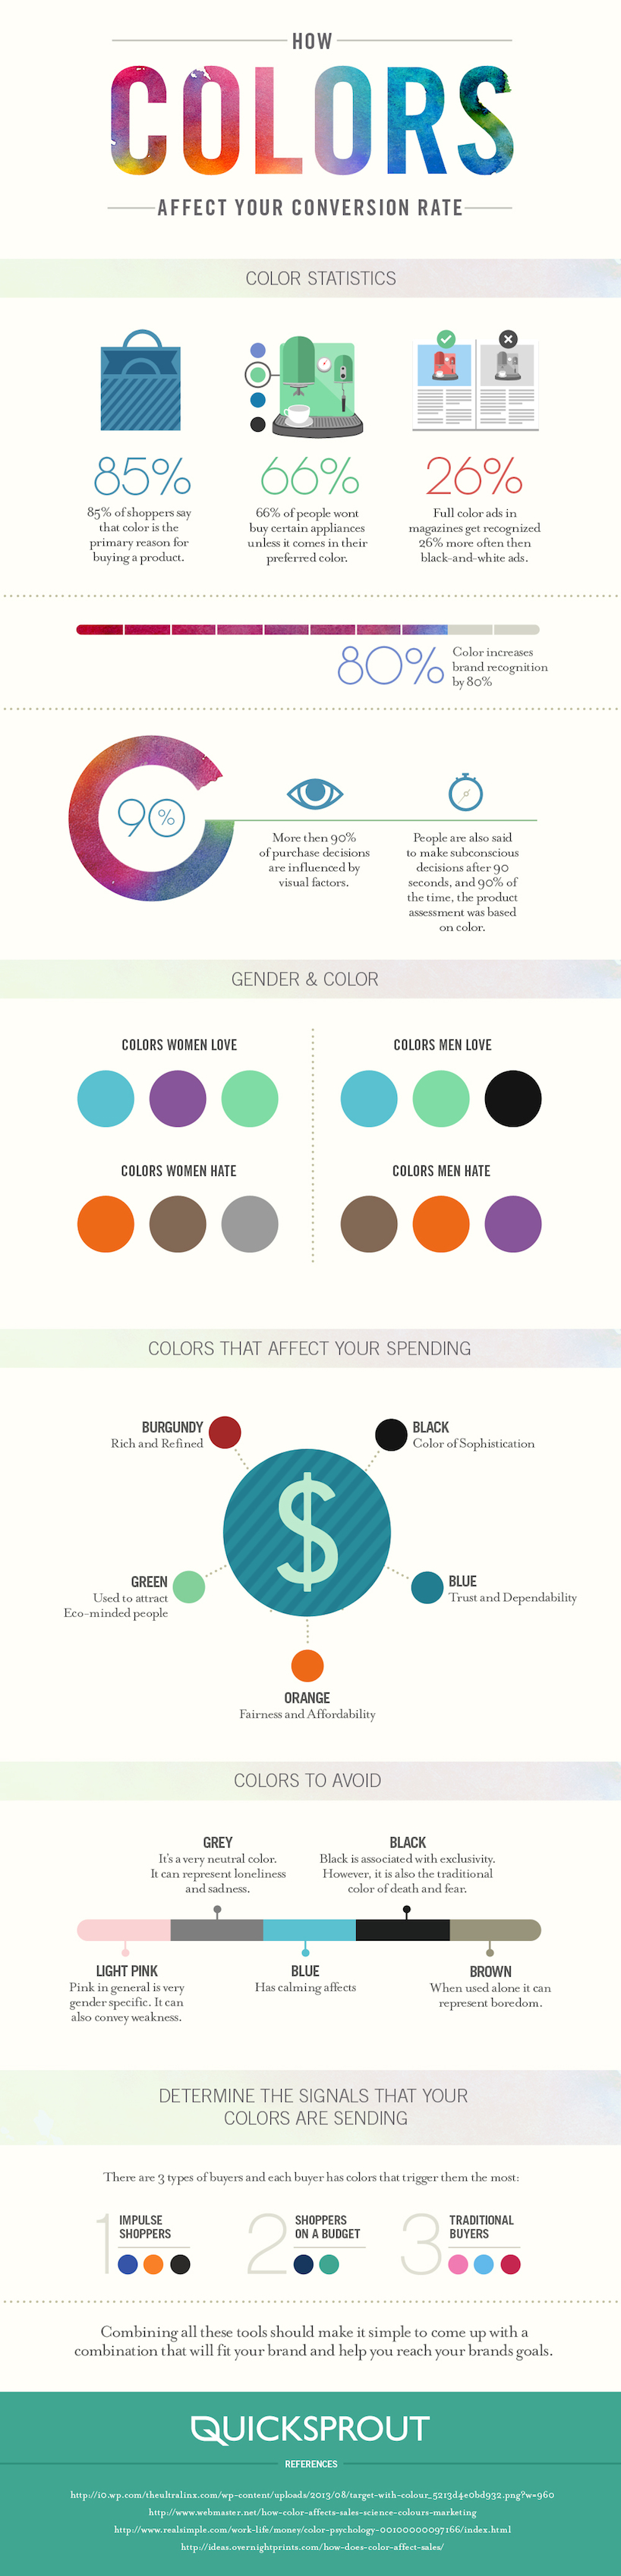 how colors affect your conversion rate